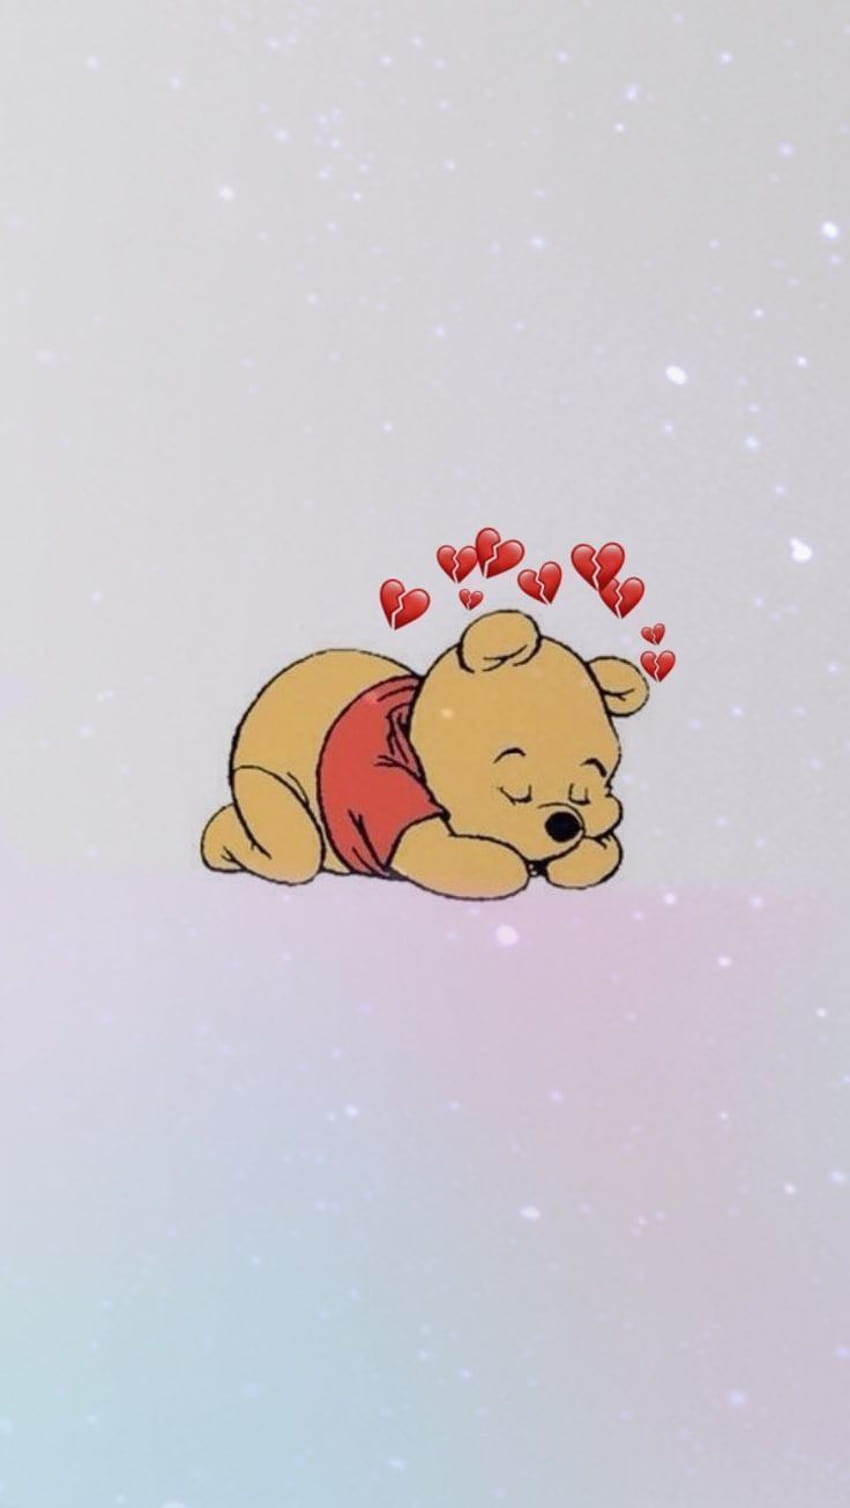 Winnie the pooh wallpaper for phone - Winnie the Pooh, profile picture, Disney